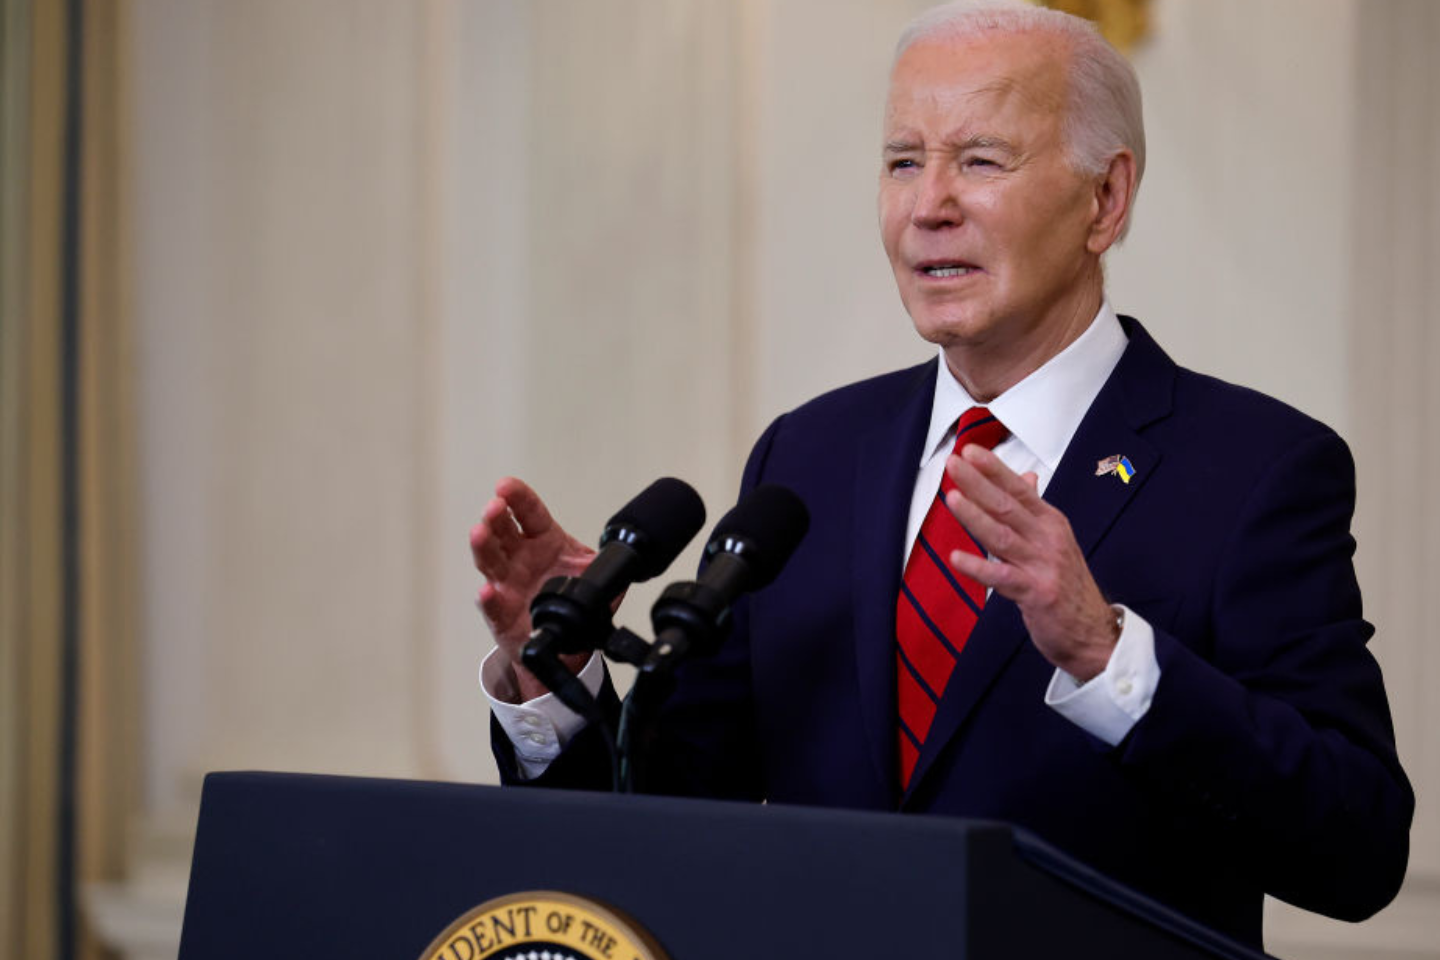 Capital Gains Tax Hike: President Biden Proposes Highest Rate Since 1922